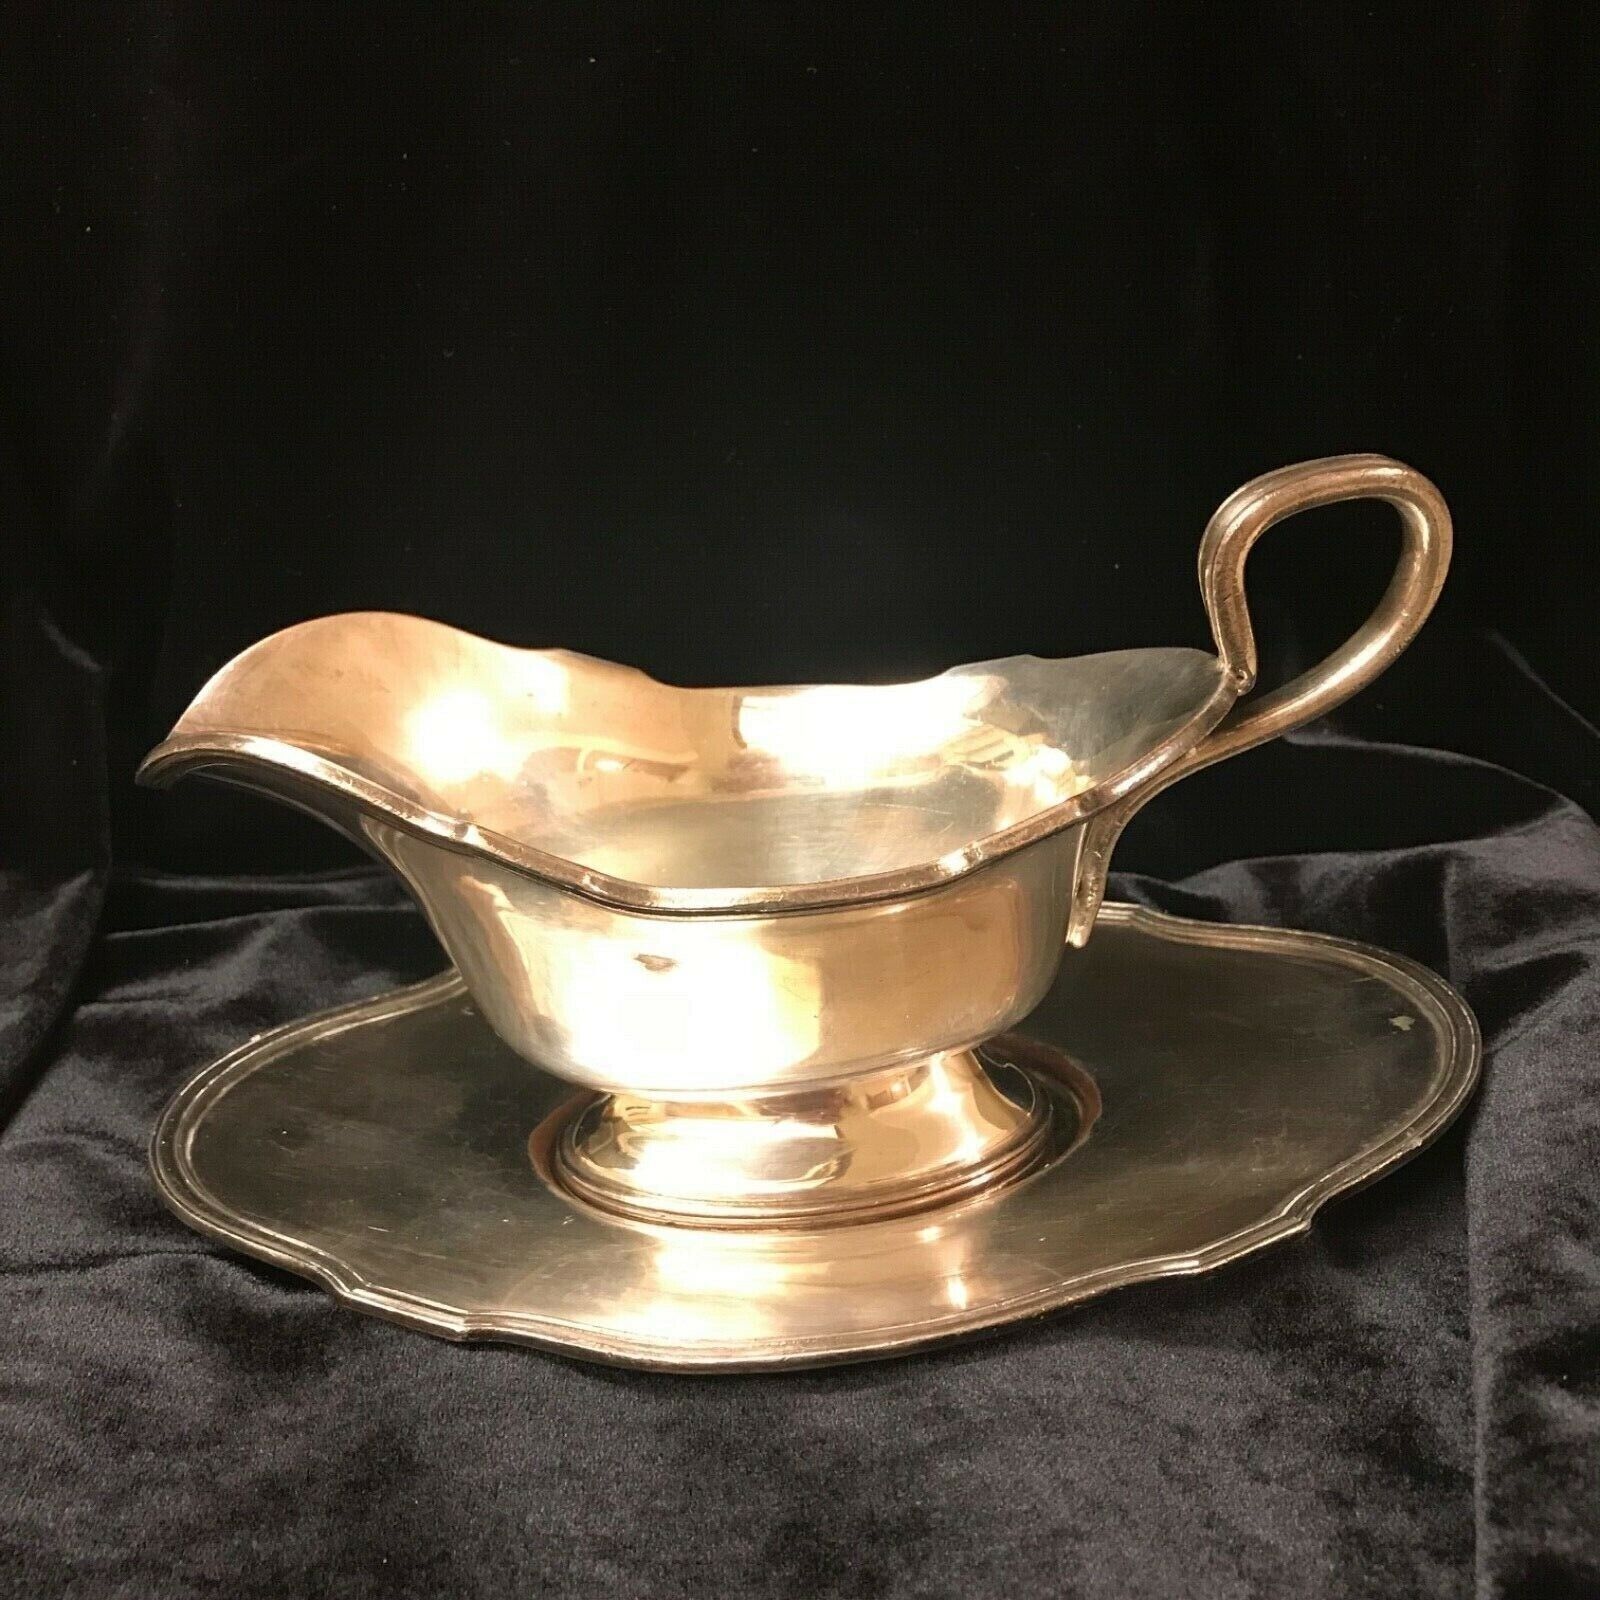 Primary image for Antique Paul Revere Boston SHEFFIELD GRAVY SAUCE BOAT TRAY SILVER PLATED #413